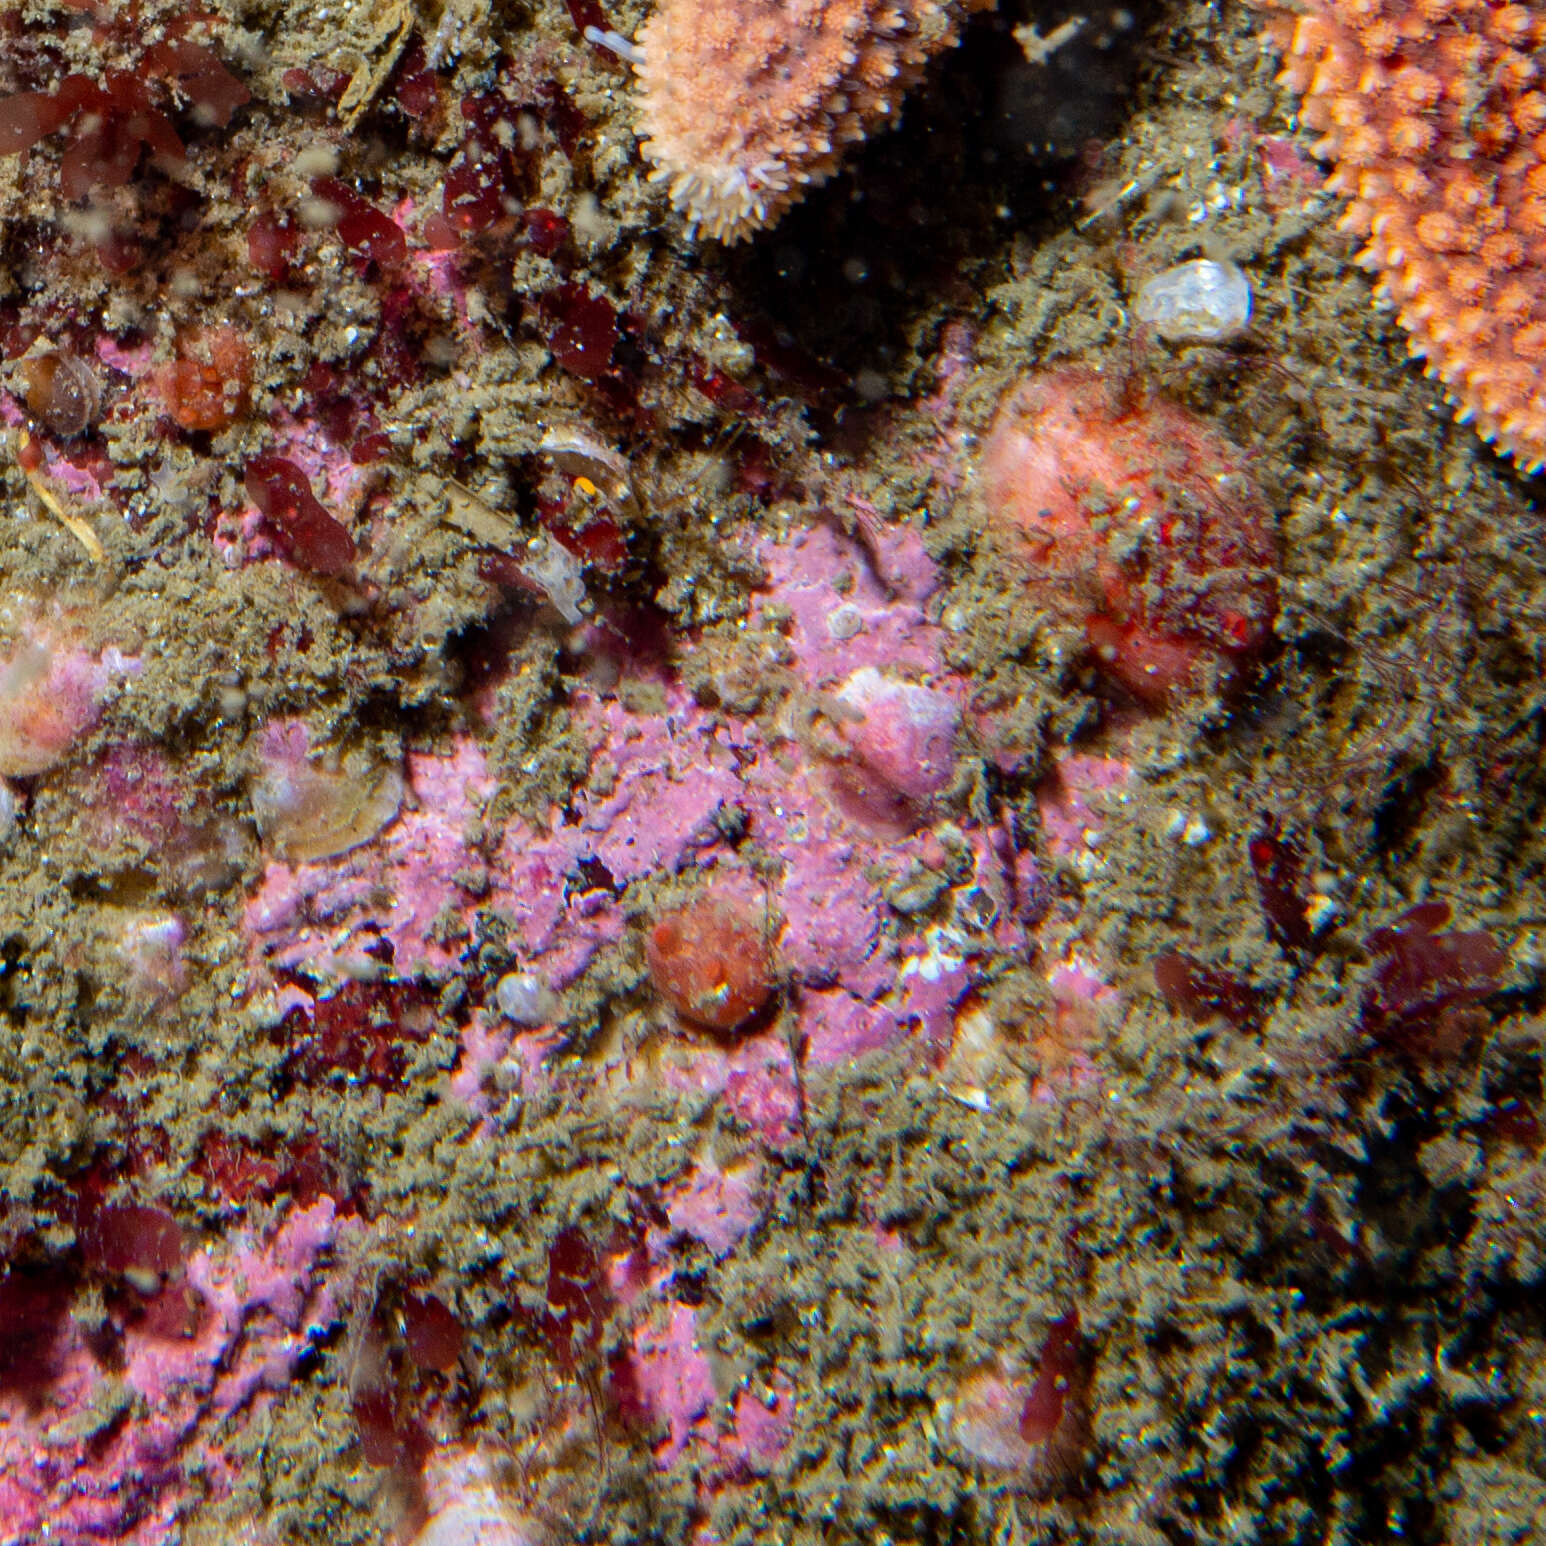 Image of blood drop sea squirt